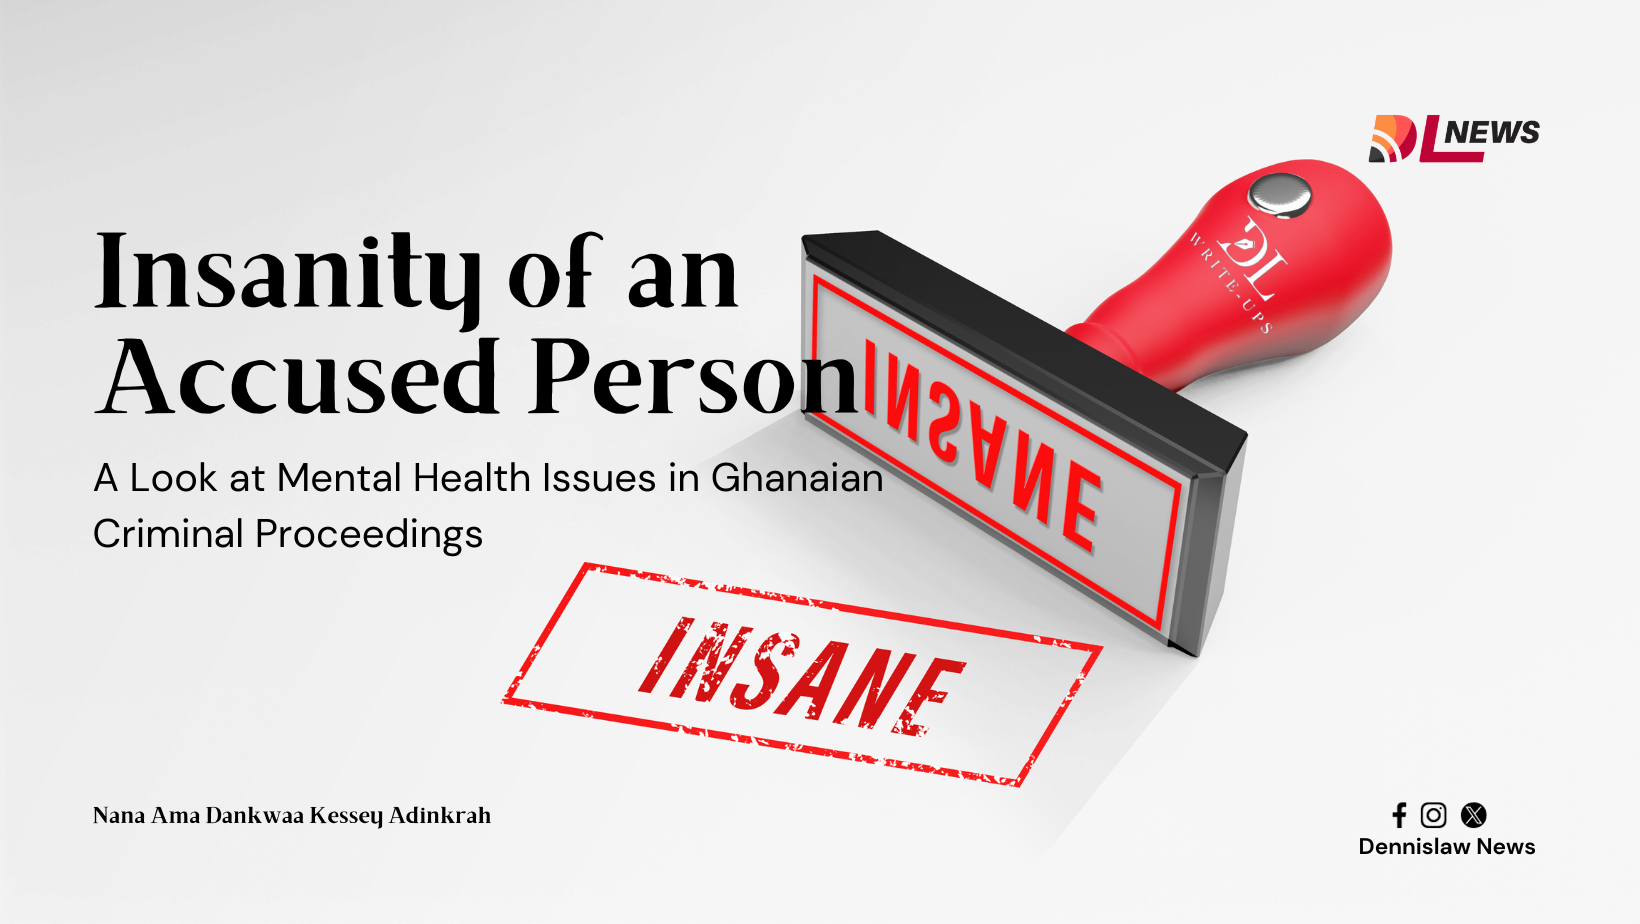 Insanity of an Accused Person: A Look at Mental Health Issues in Ghanaian Criminal Proceedings